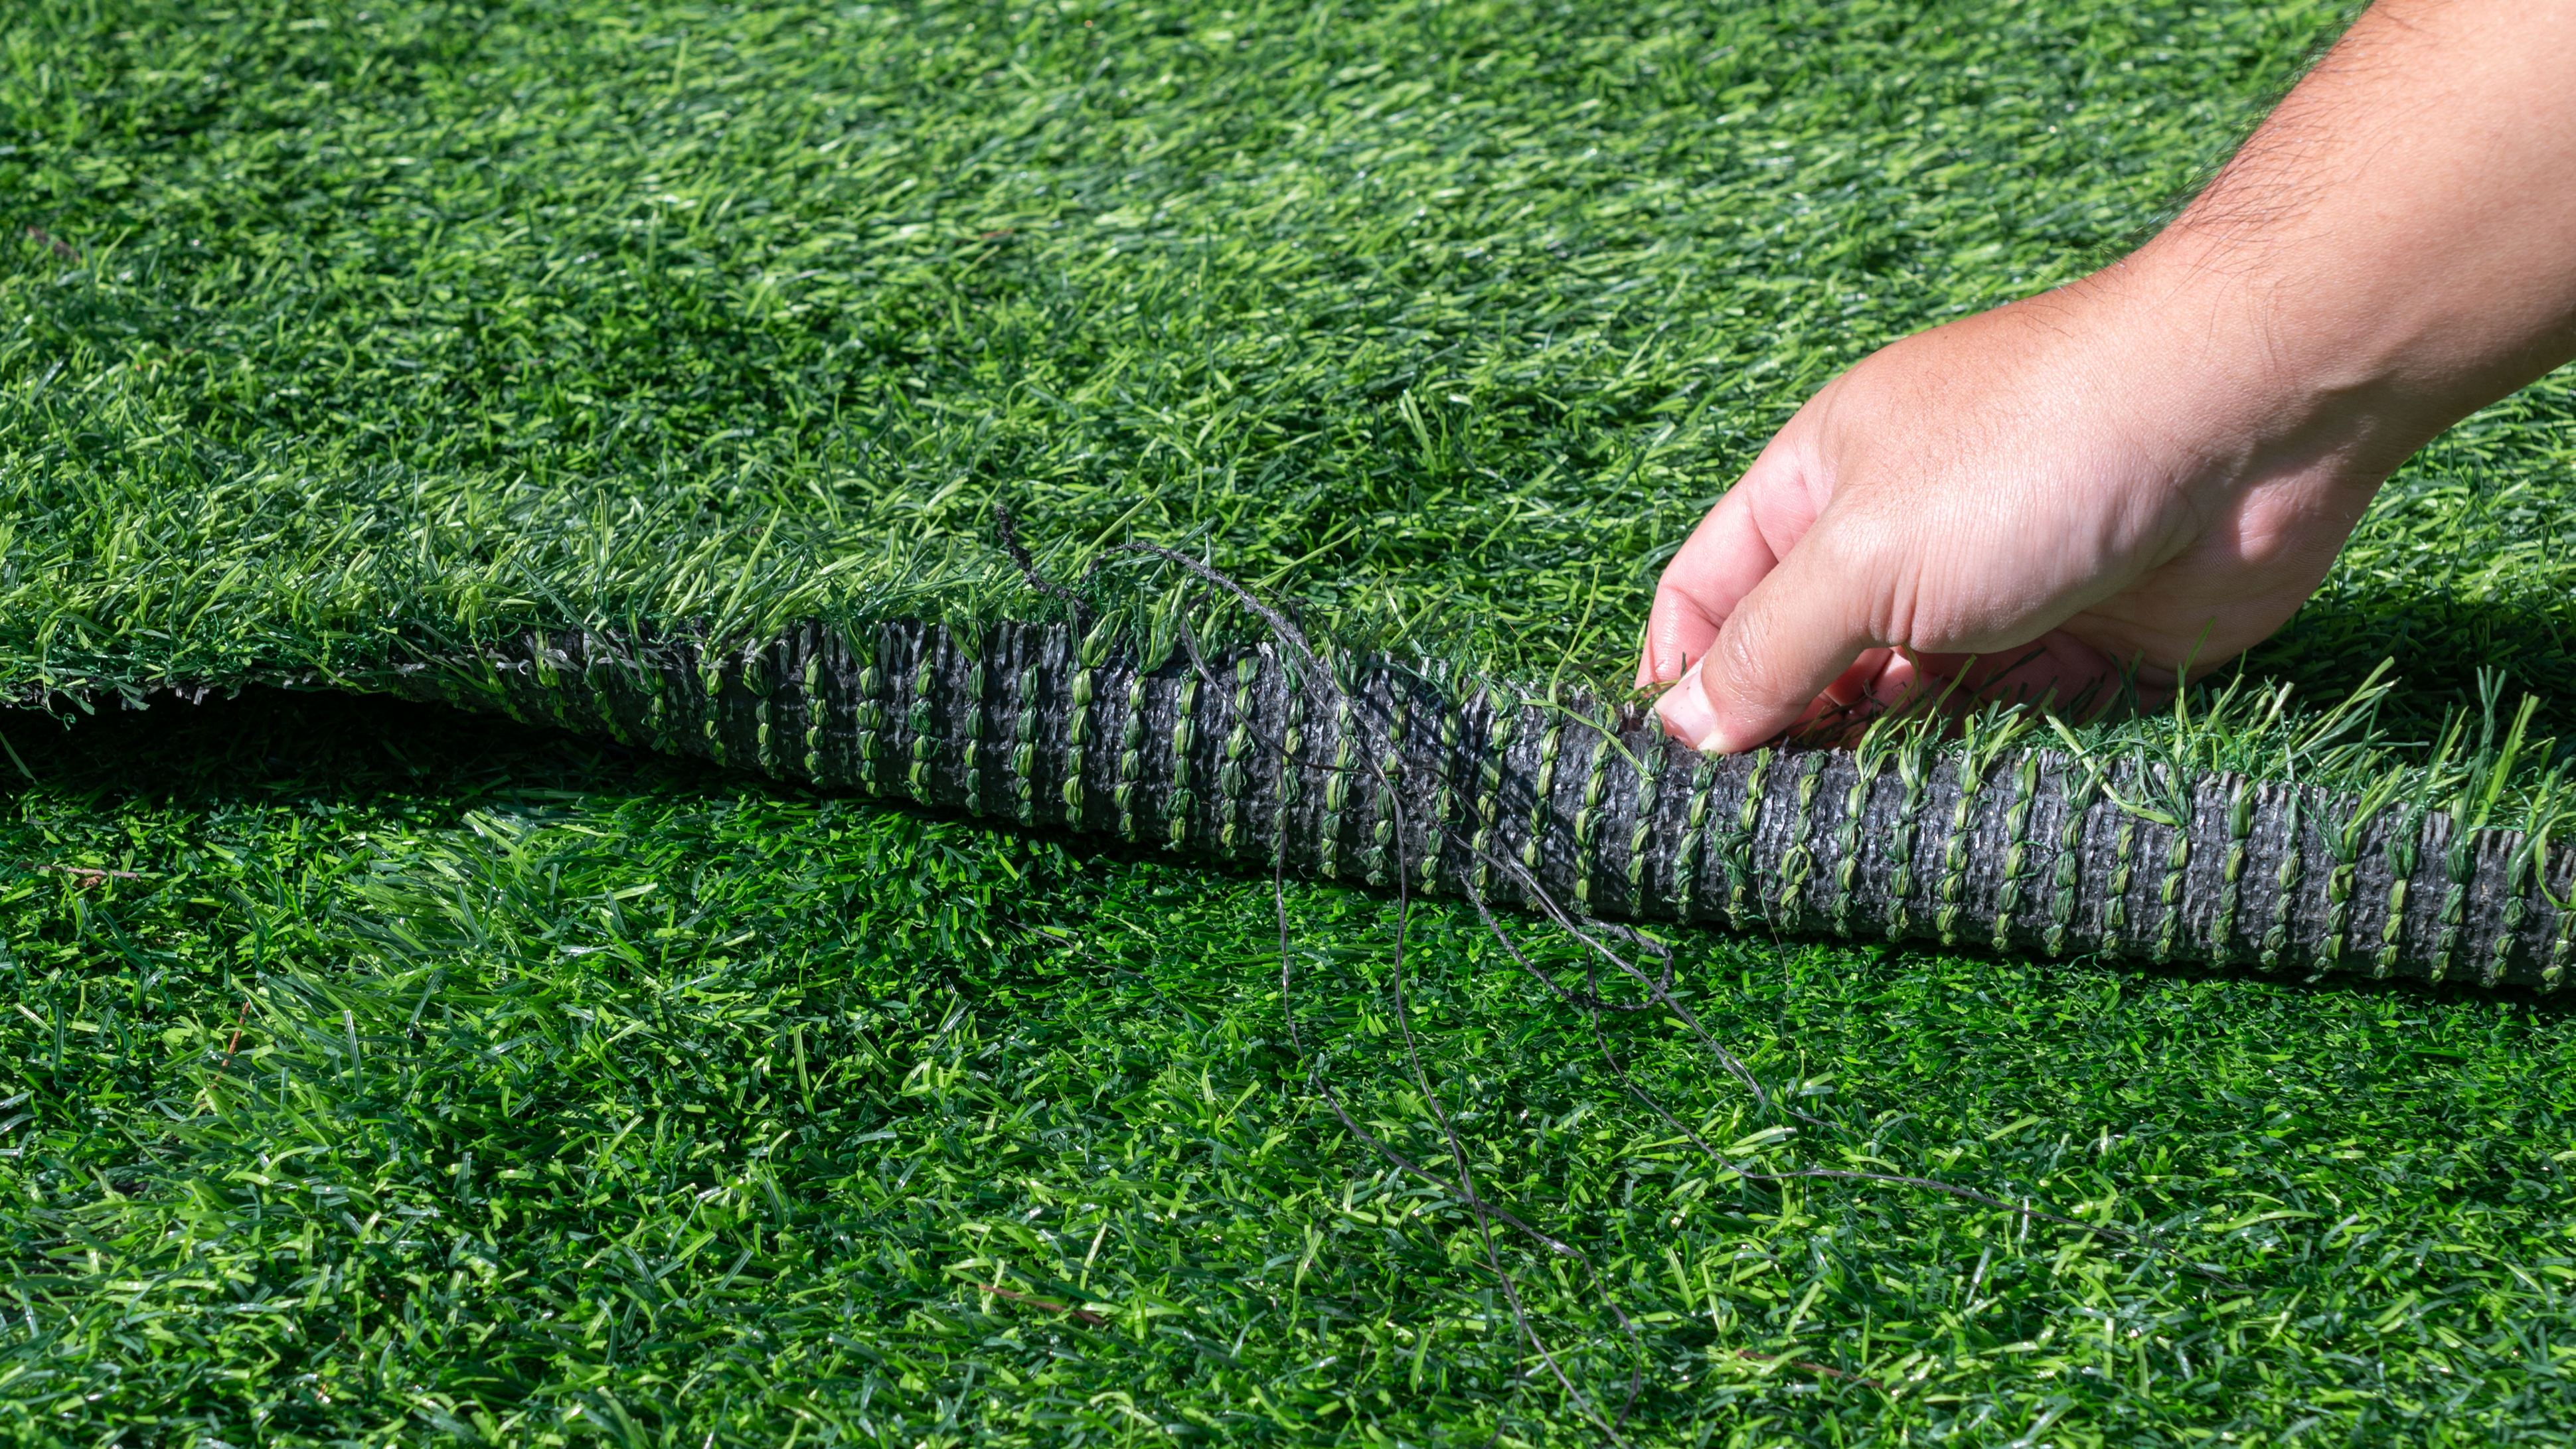 A roll of artificial turf being pulled up to show the underside